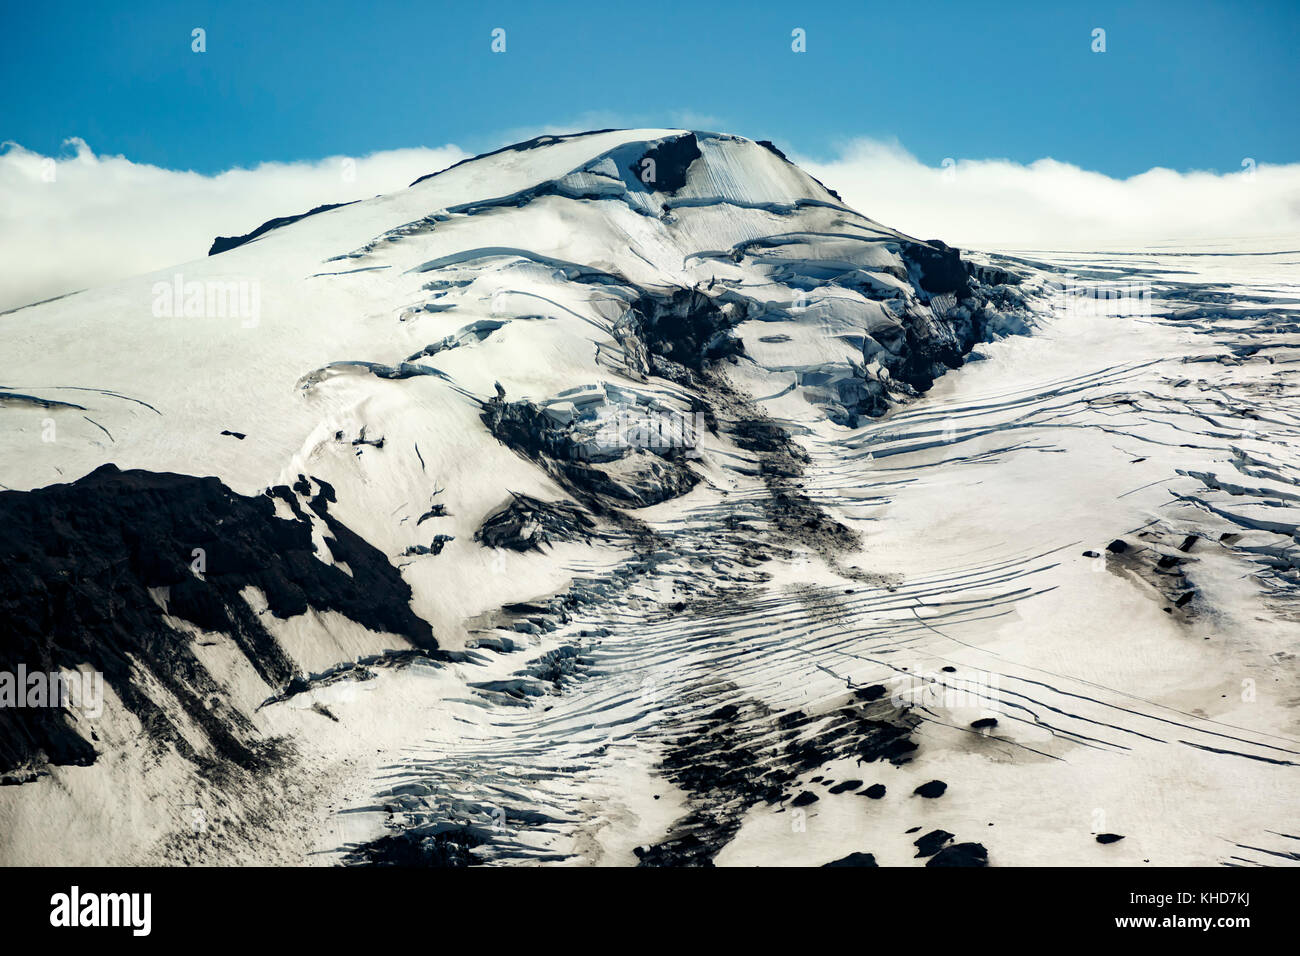 Aerial view of snow-covered Eyjafjallajokull Volcano, Iceland Stock Photo